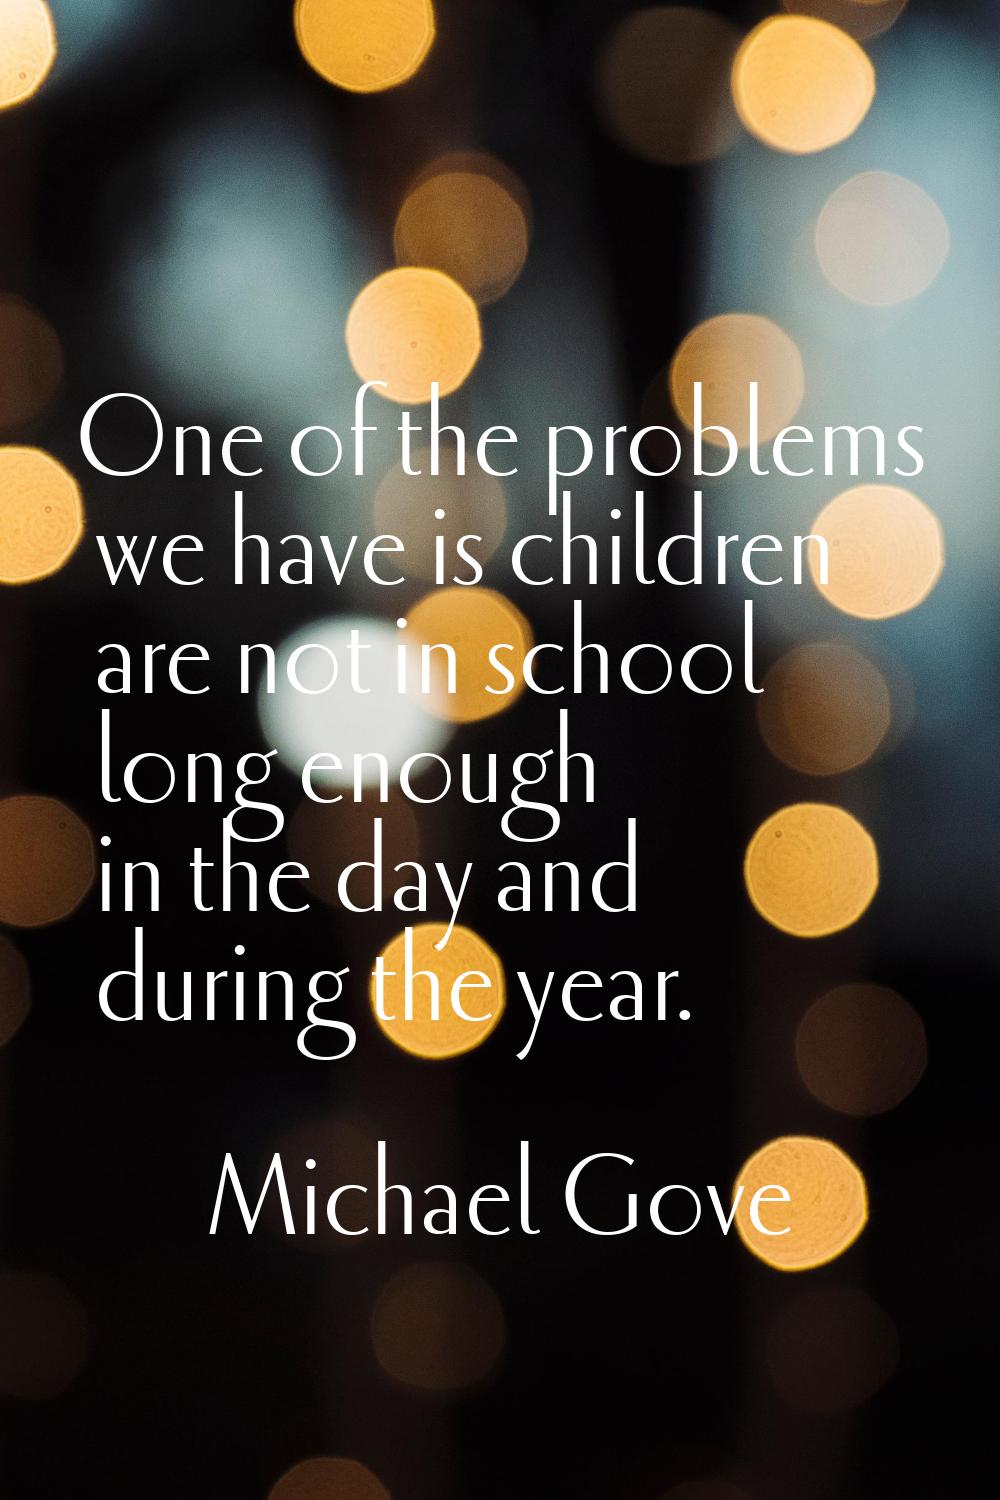 One of the problems we have is children are not in school long enough in the day and during the yea